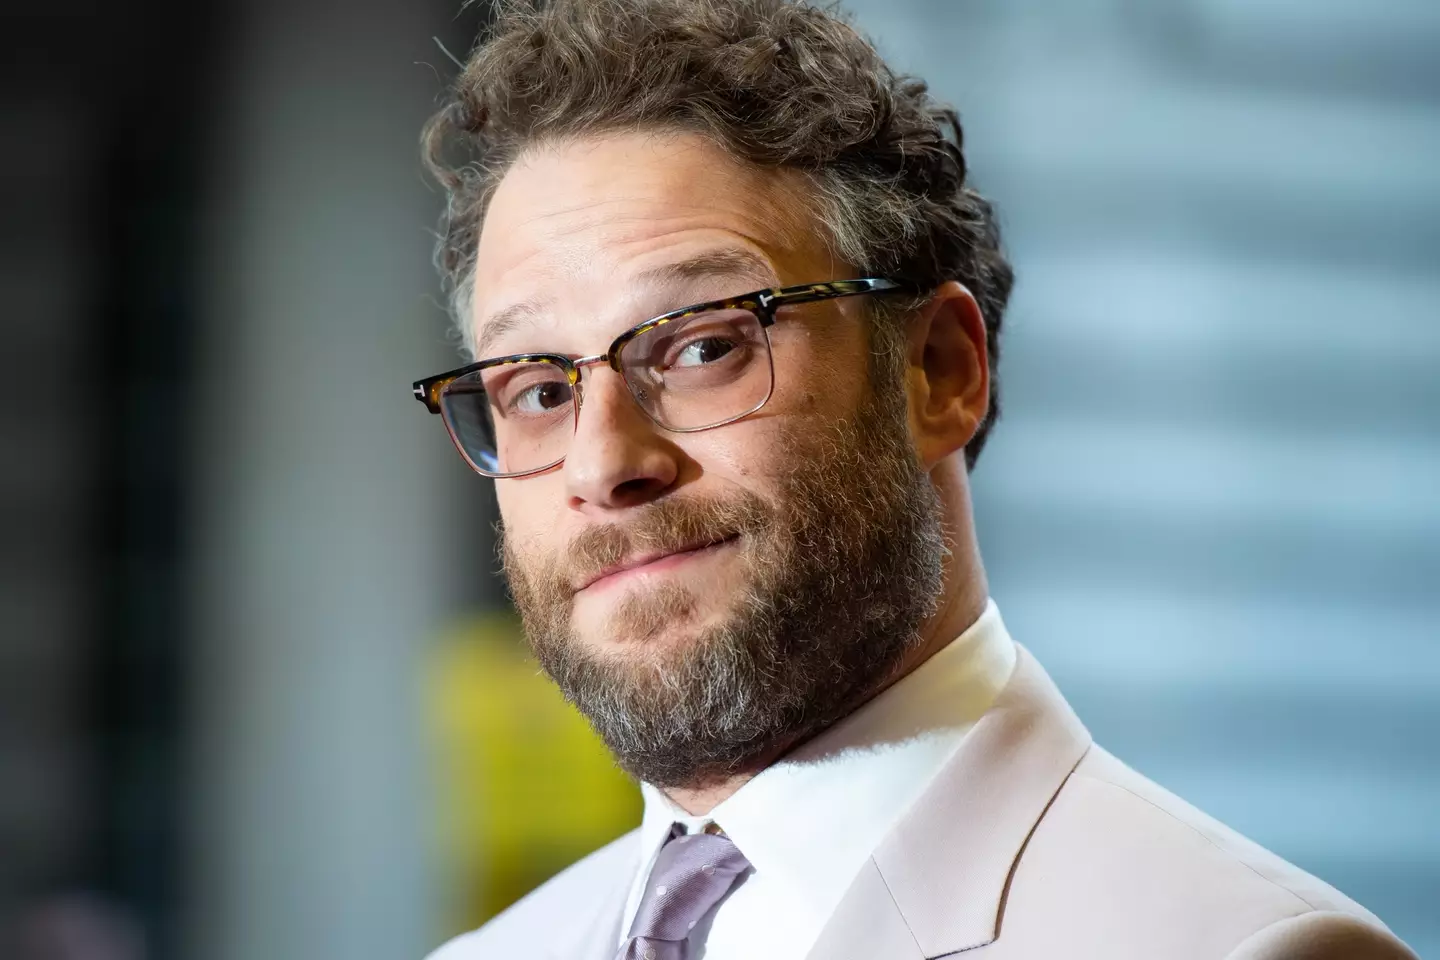 Seth Rogen has responded to the debate he faced after saying, 'No one's made a good high school movie since then'.